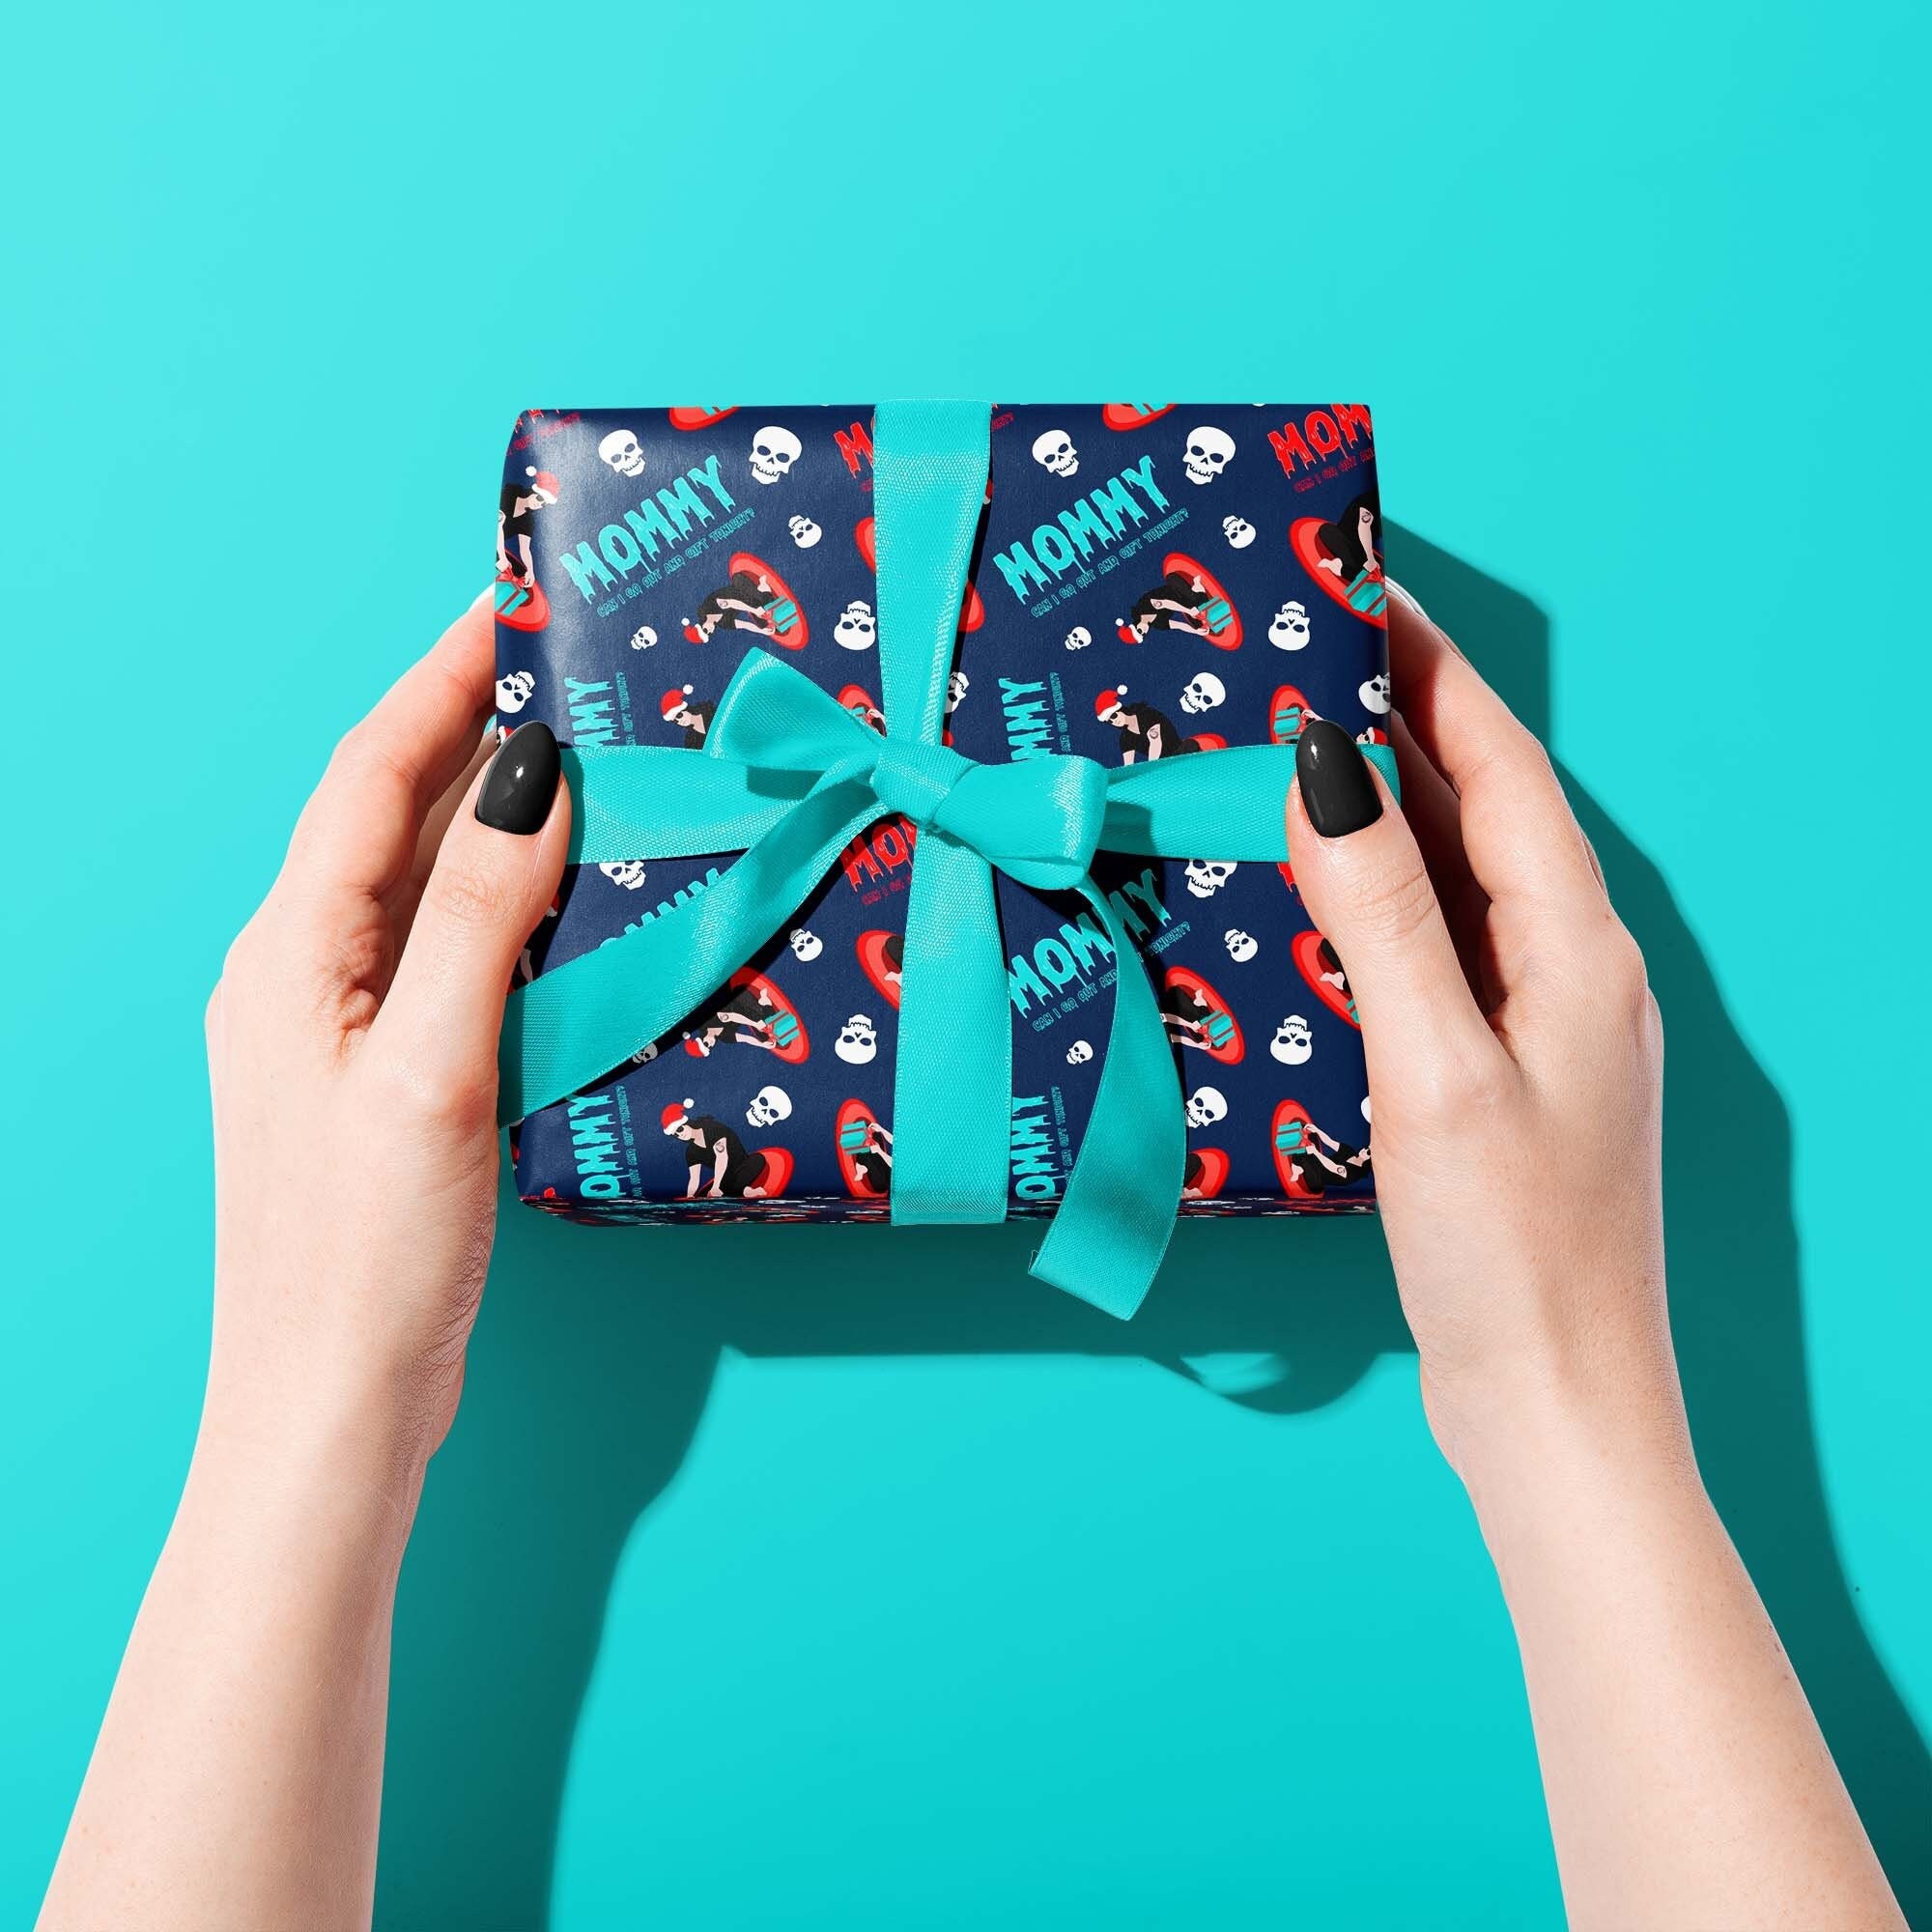 Mom accidentally wraps Christmas presents with X-rated wrapping paper – New  York Post